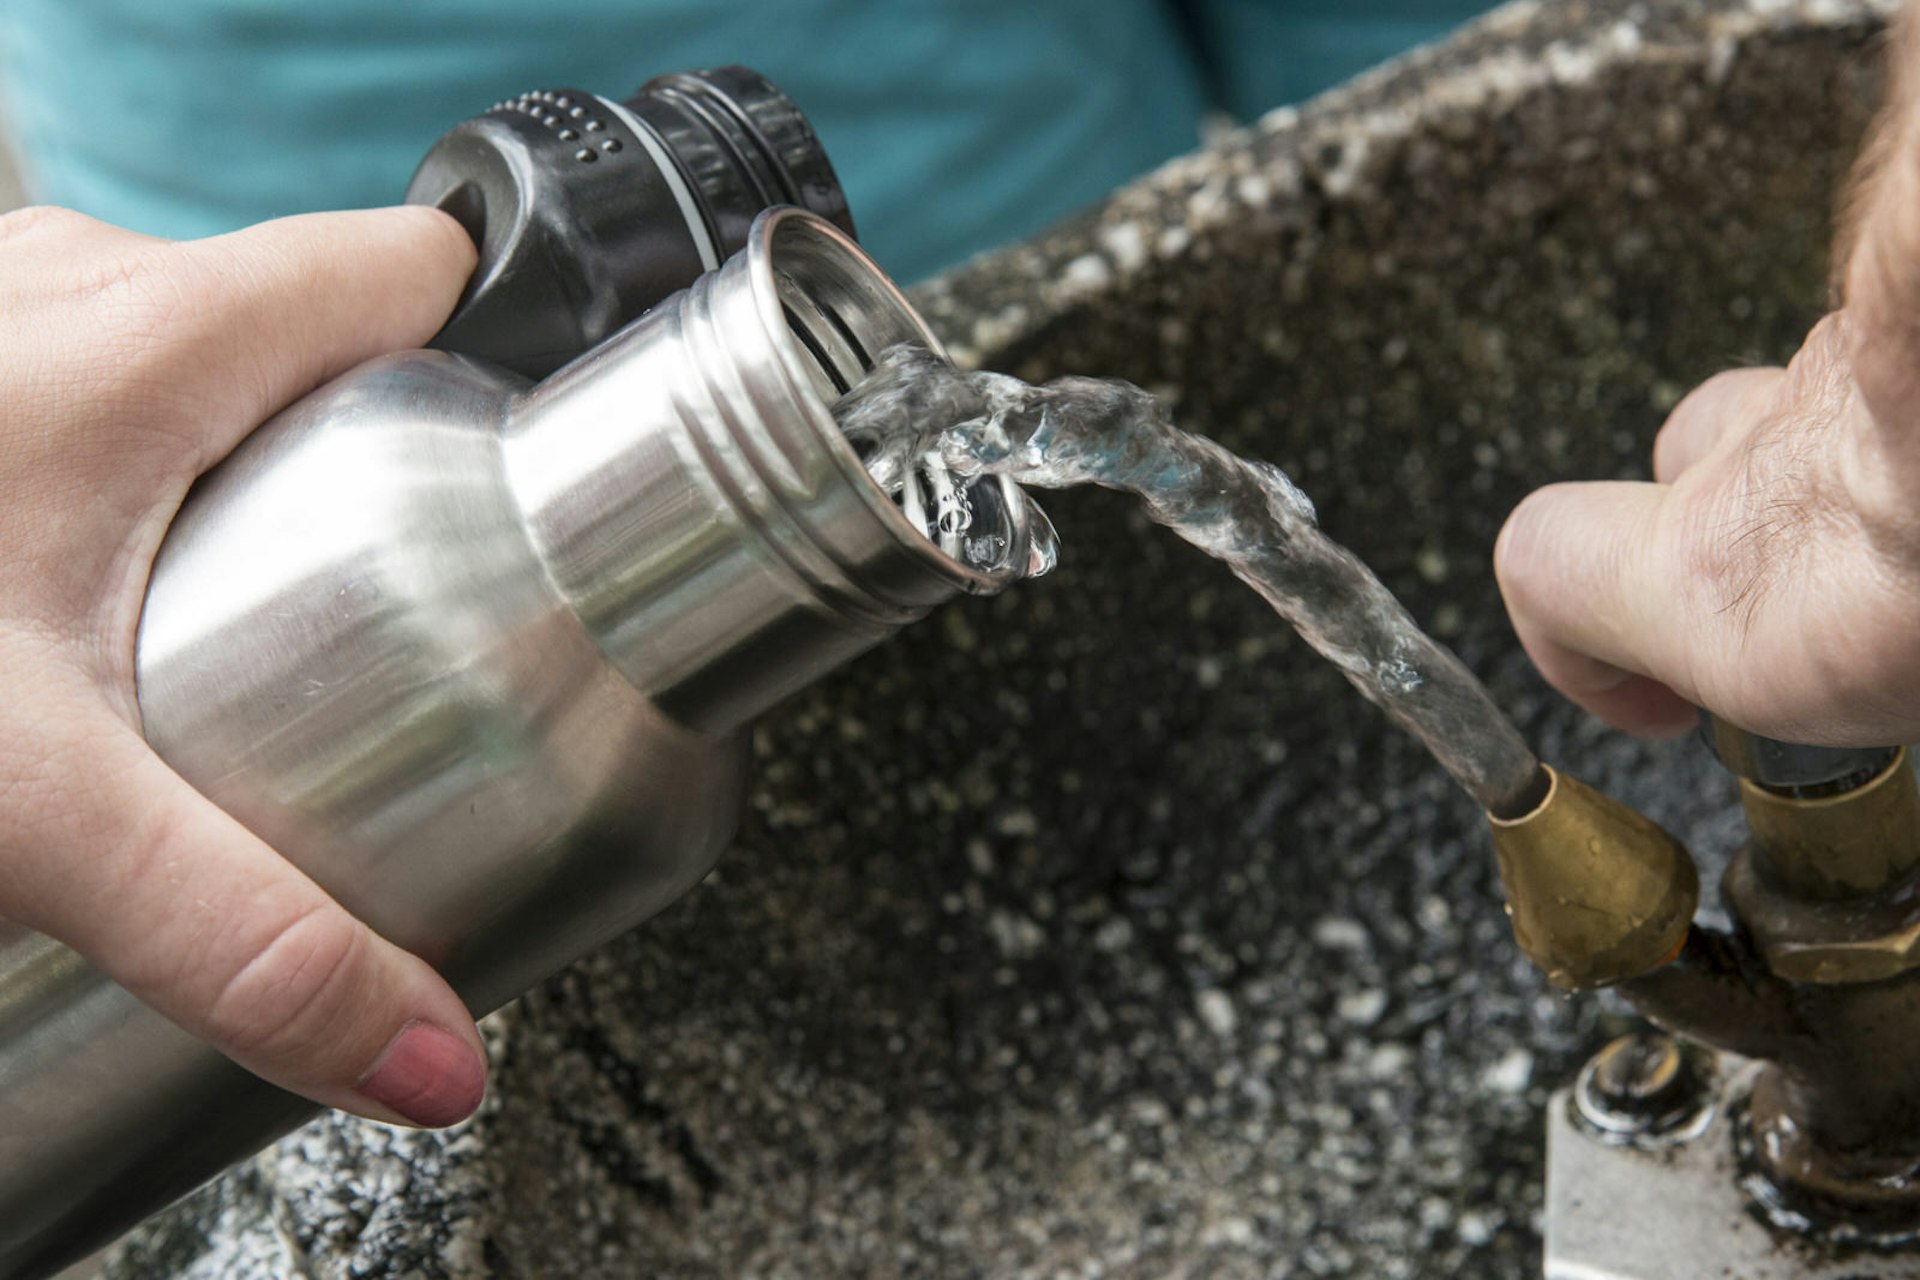 Refilling a bottle in a water fountain © Clsgraphics / Getty Images